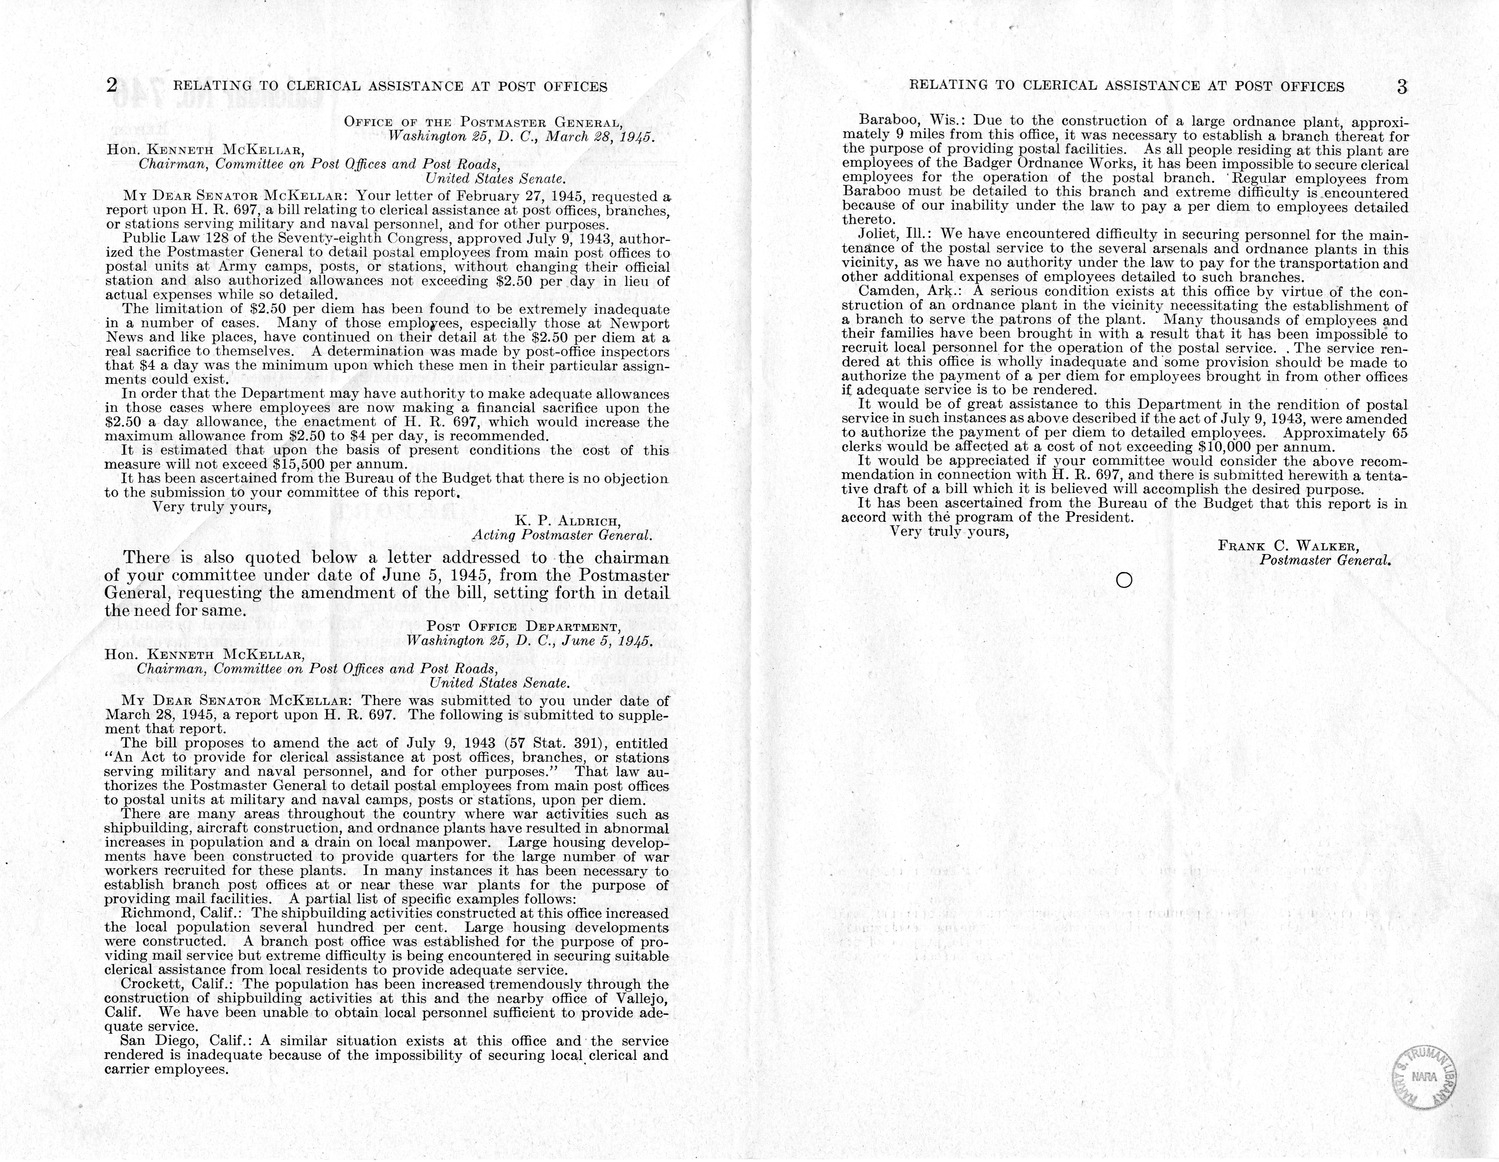 Memorandum from Frederick J. Bailey to M. C. Latta, H.R. 697, Relating to Clerical Assistance at Post Offices, Branches, or Stations Serving Military and Naval Personnel, with Attachments